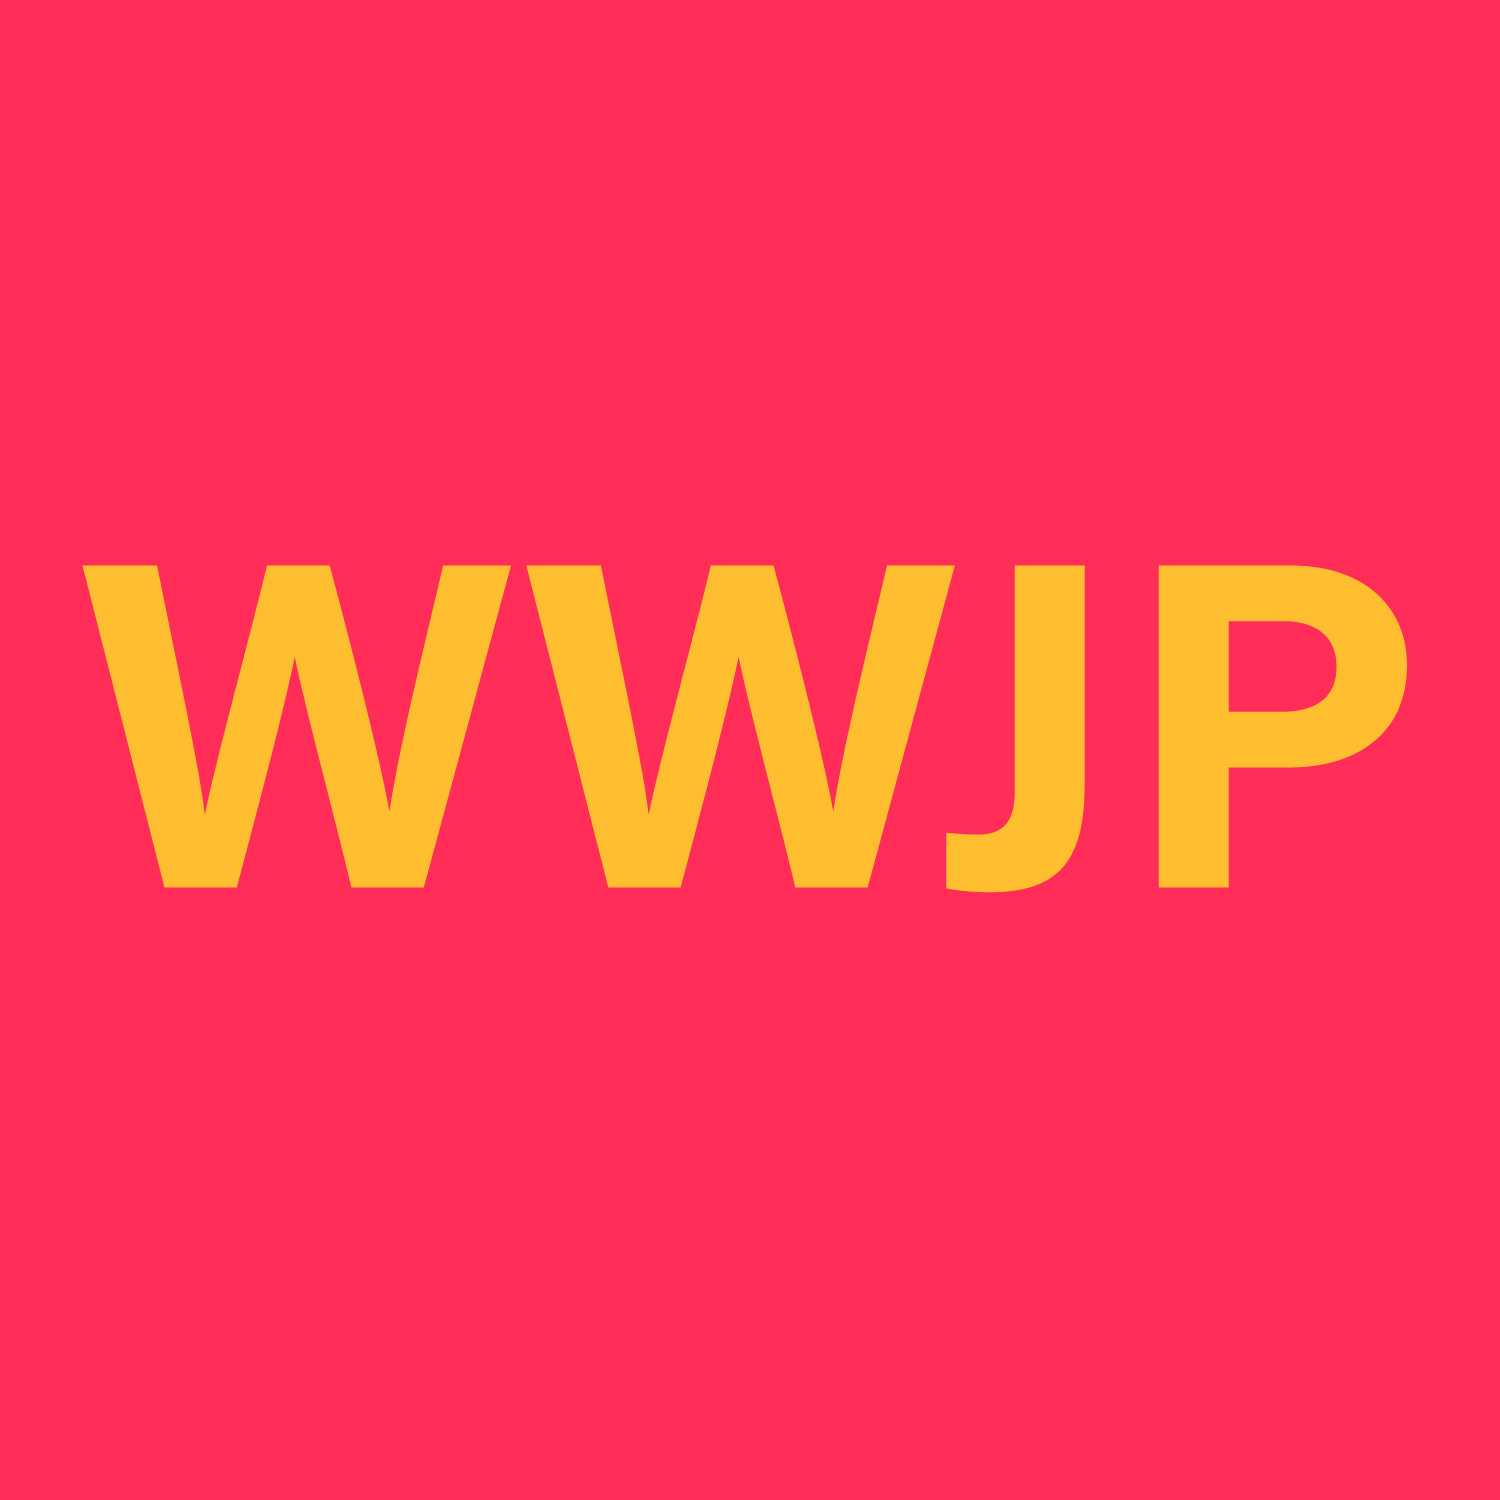 About WWJP